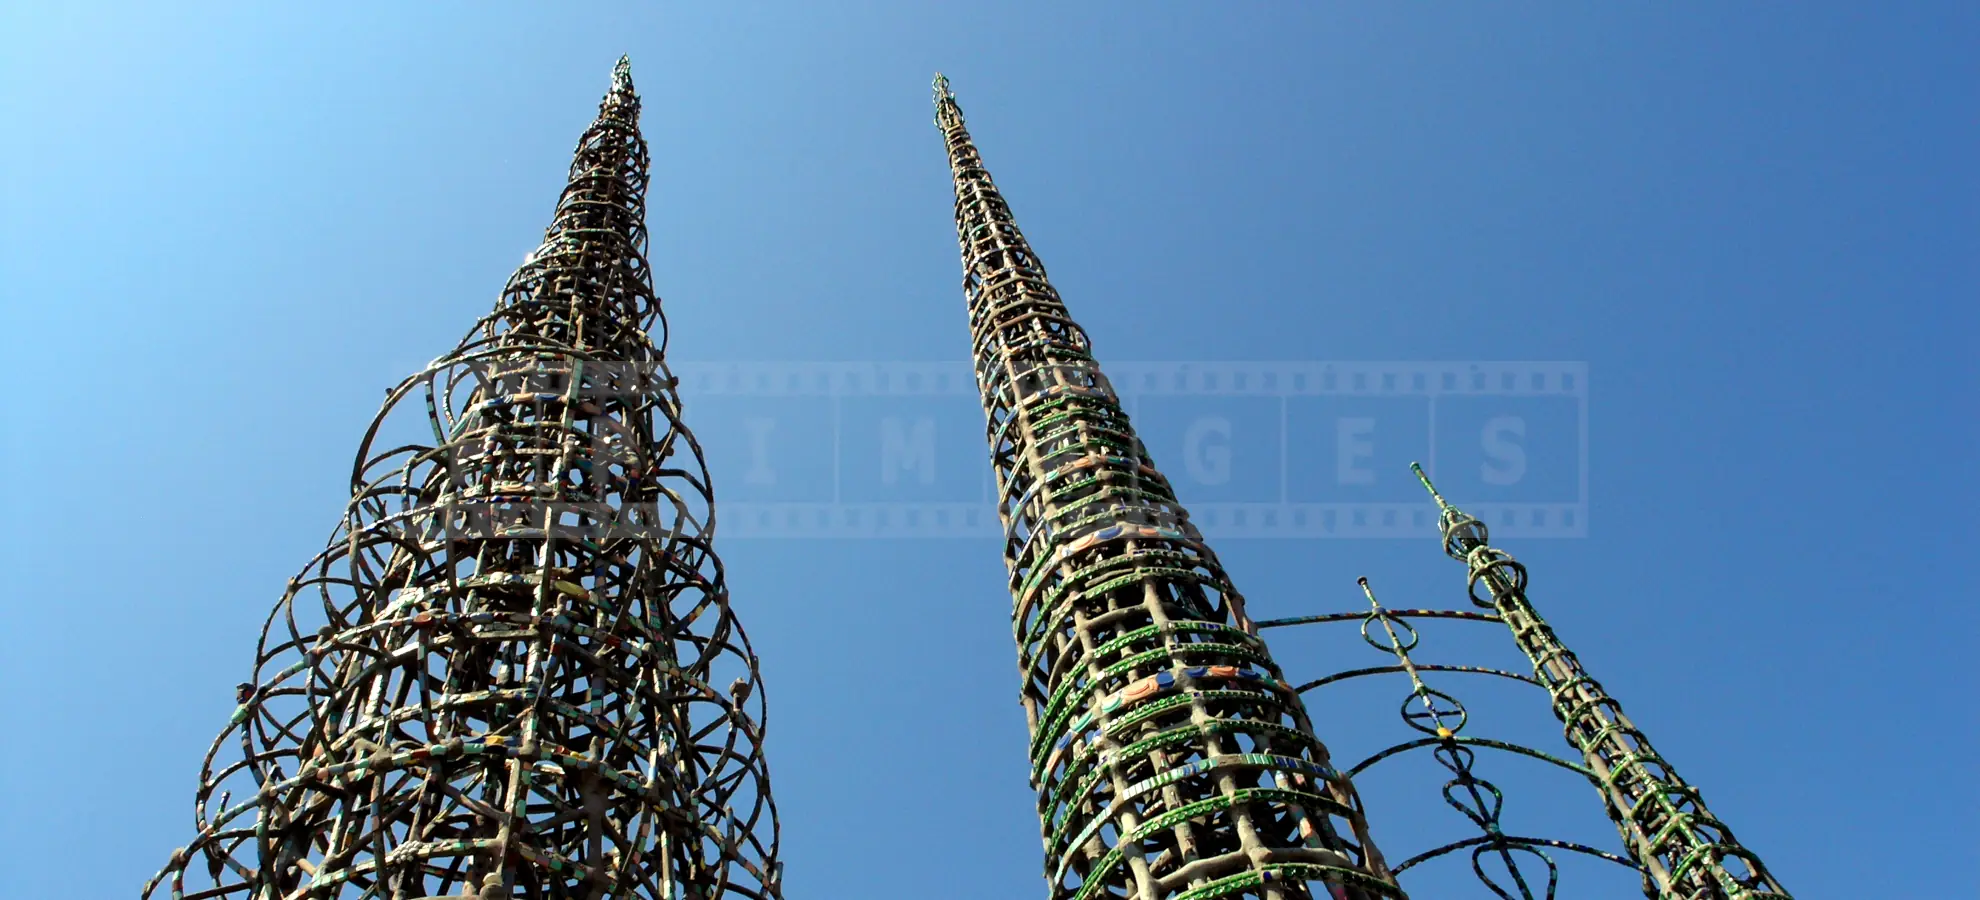 amazing architecture of watts towers in loas angeles california